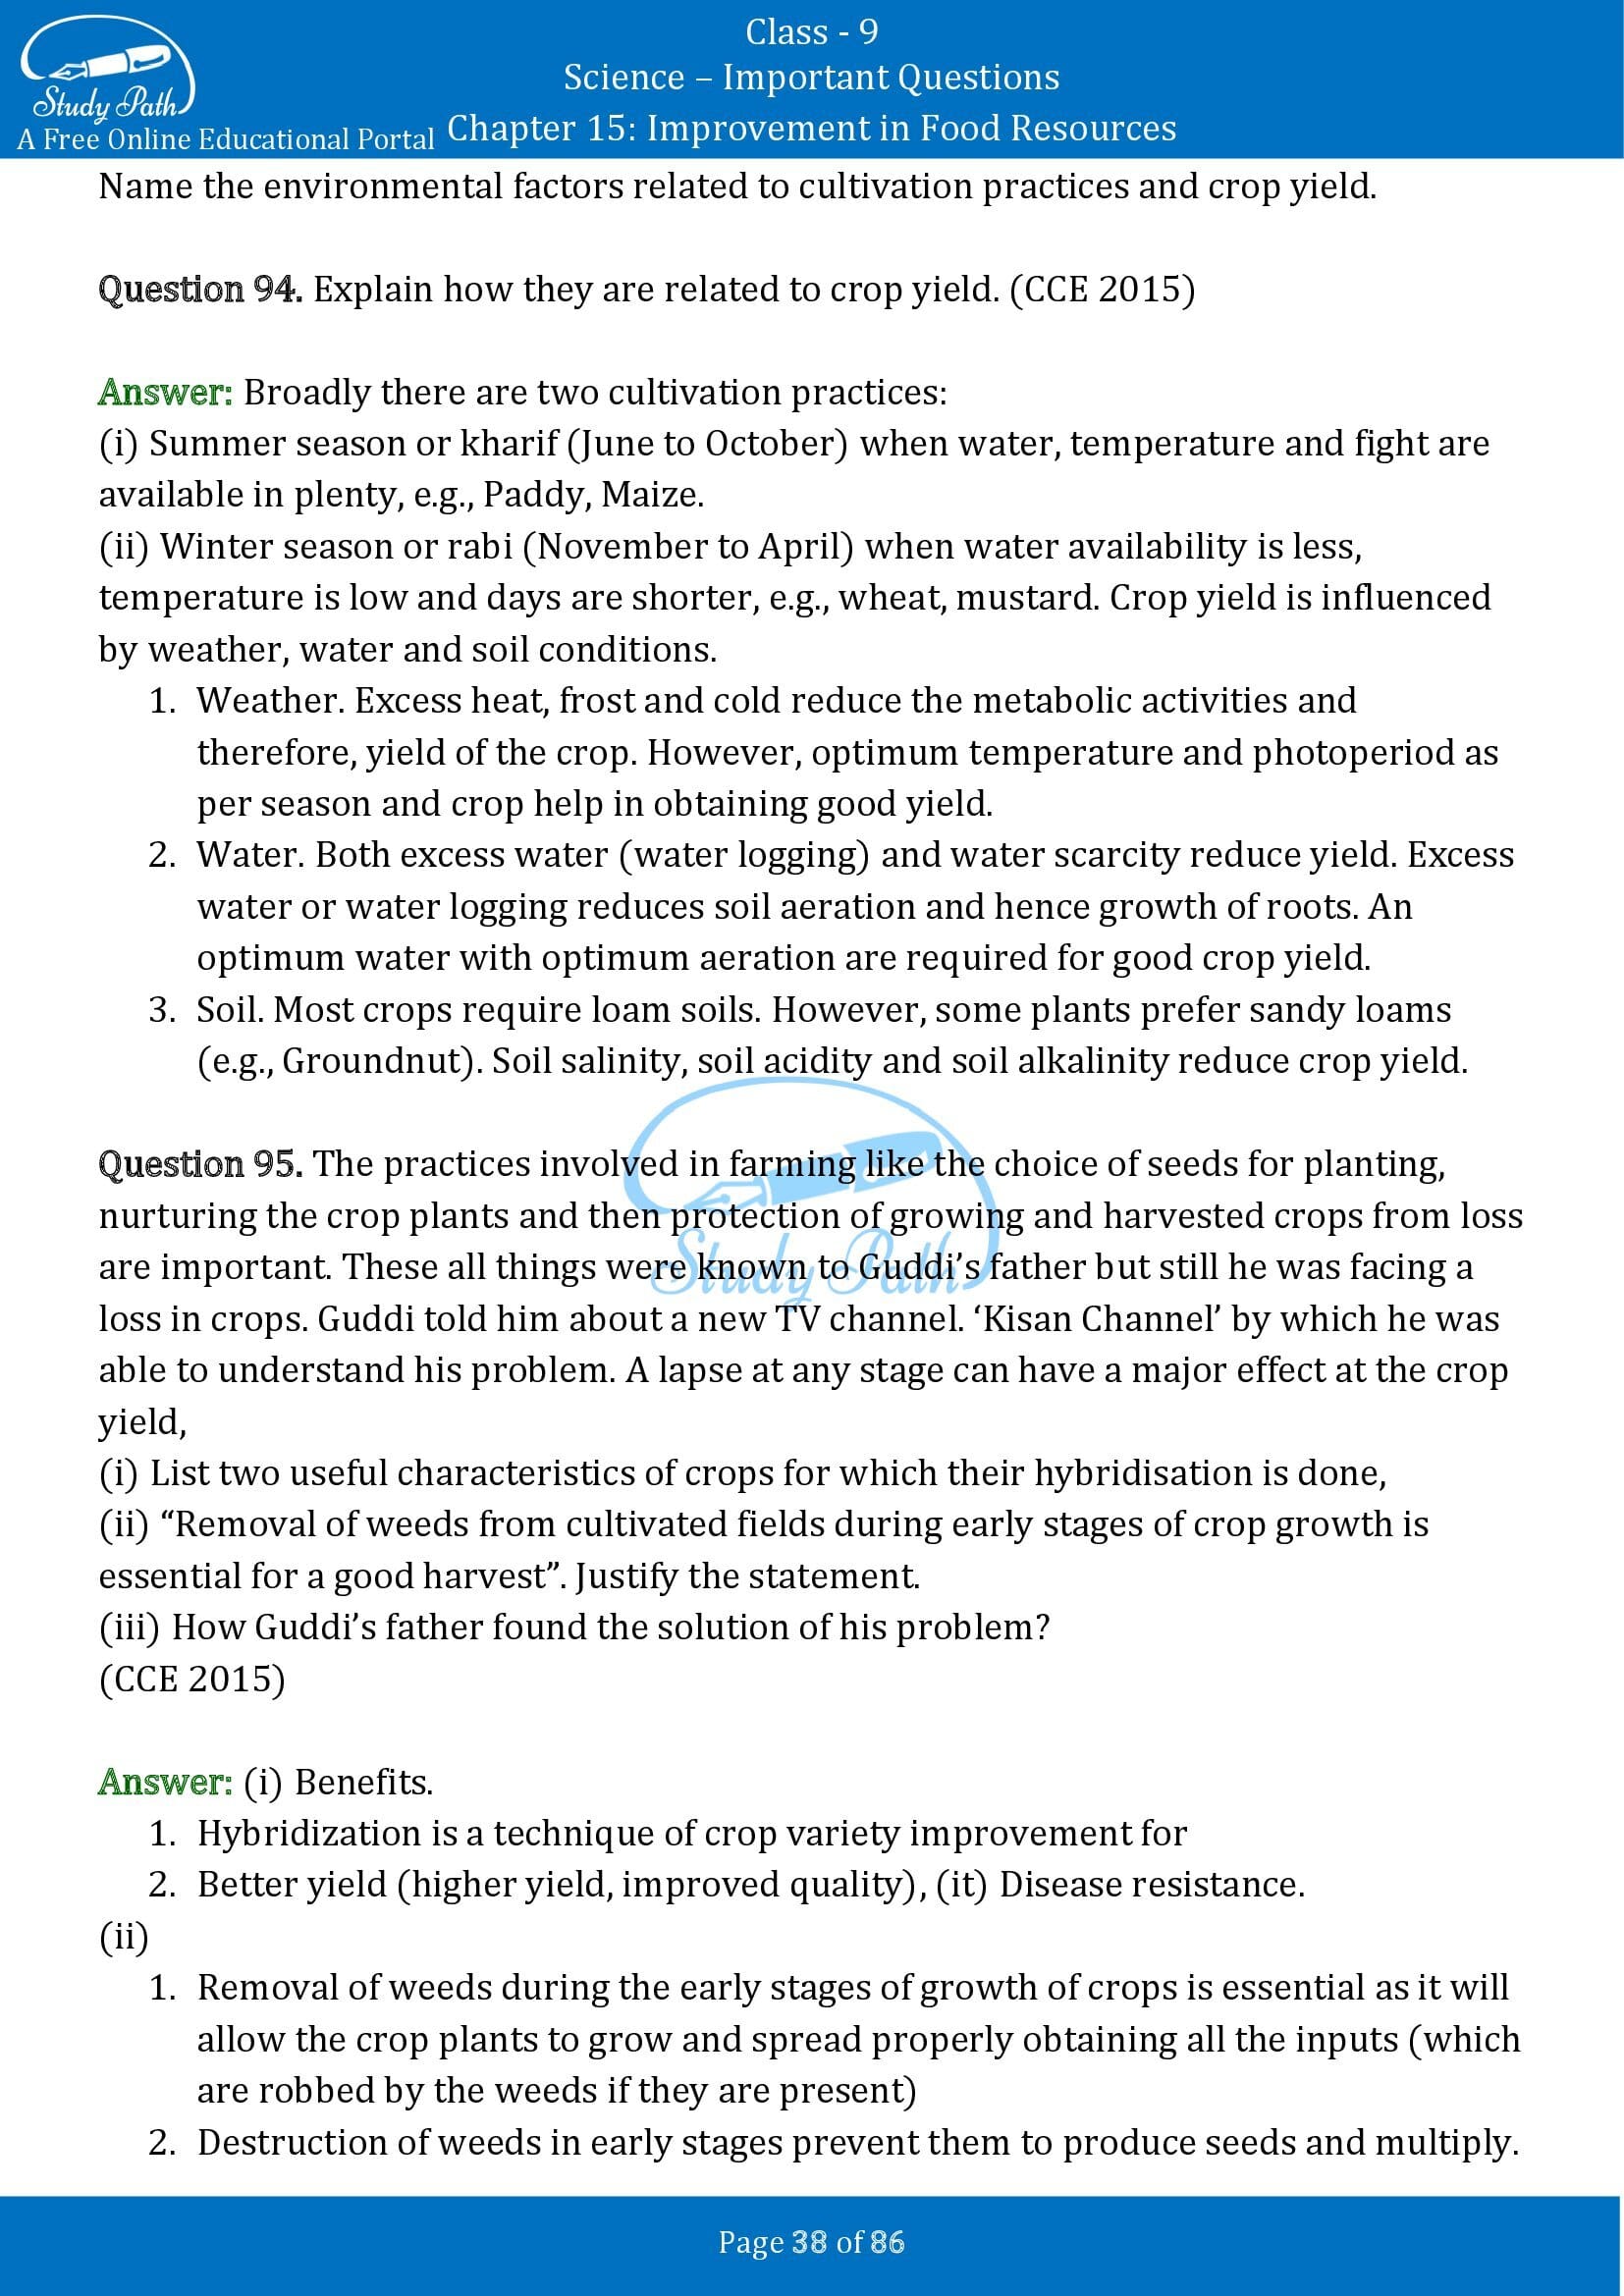 Important Questions for Class 9 Science Chapter 15 Improvement in Food Resources 00038